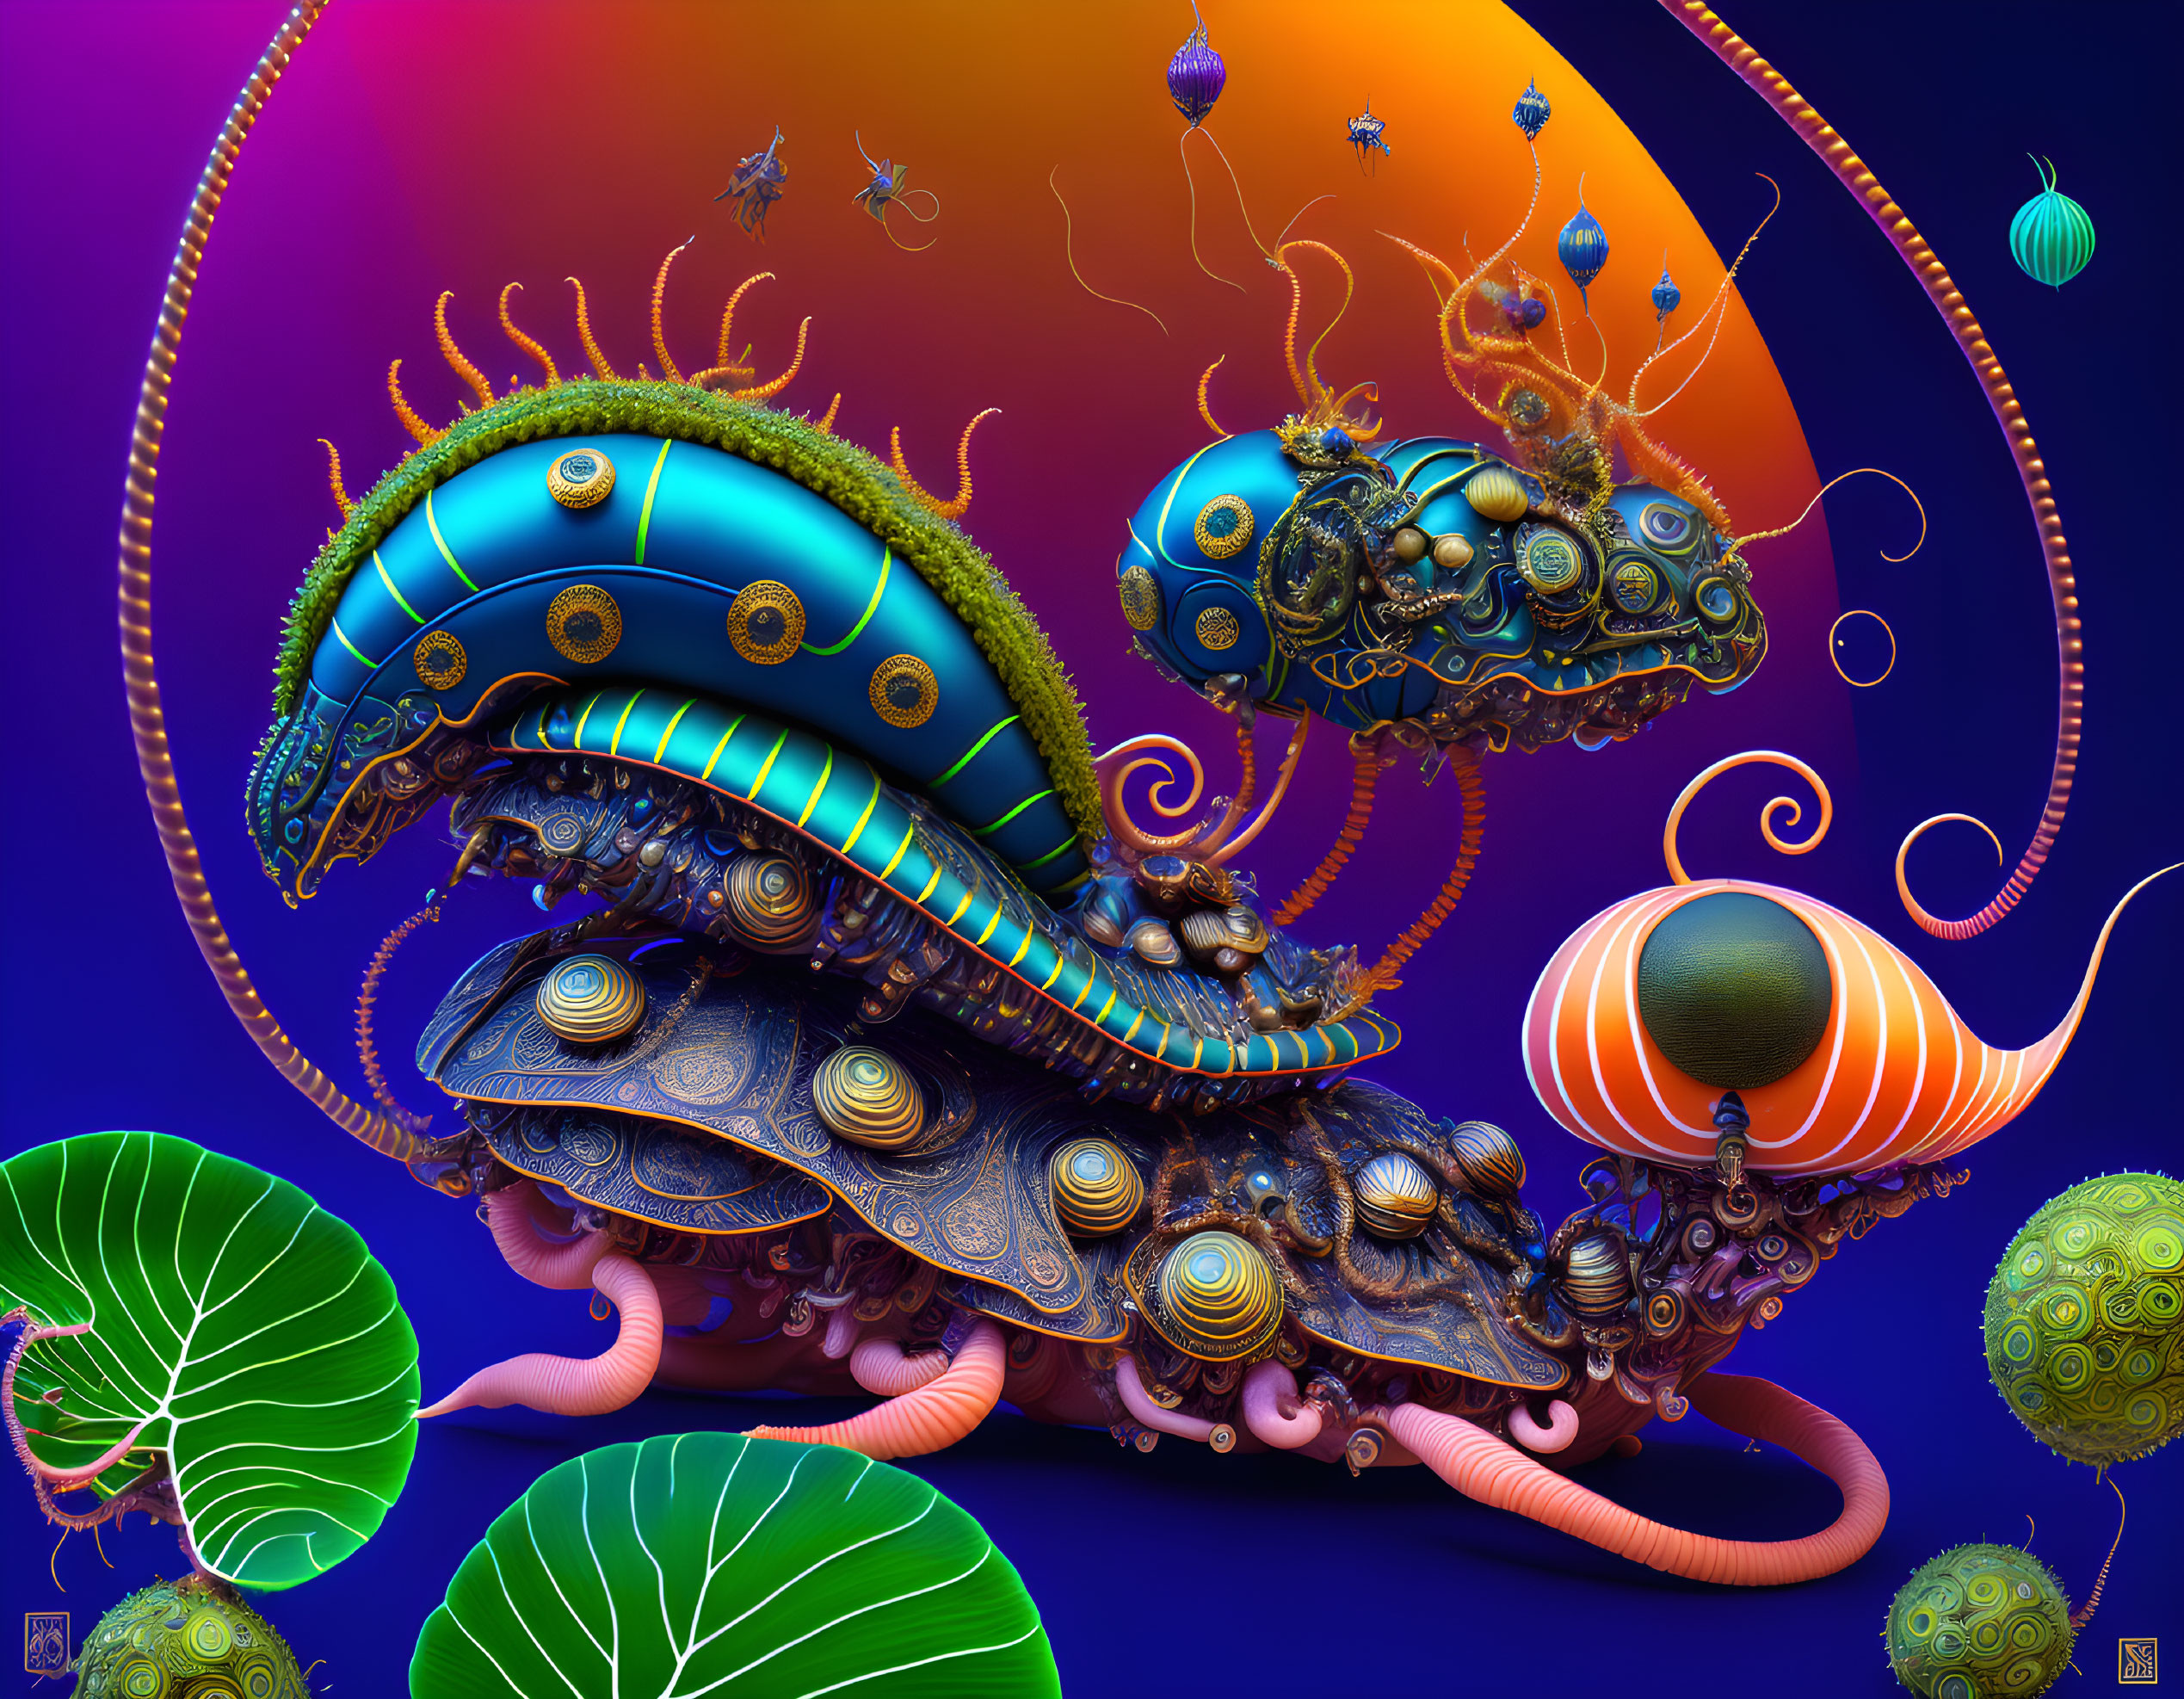 Colorful digital art: fantastical creatures, shell-like structures, tentacles, orbs, and lot